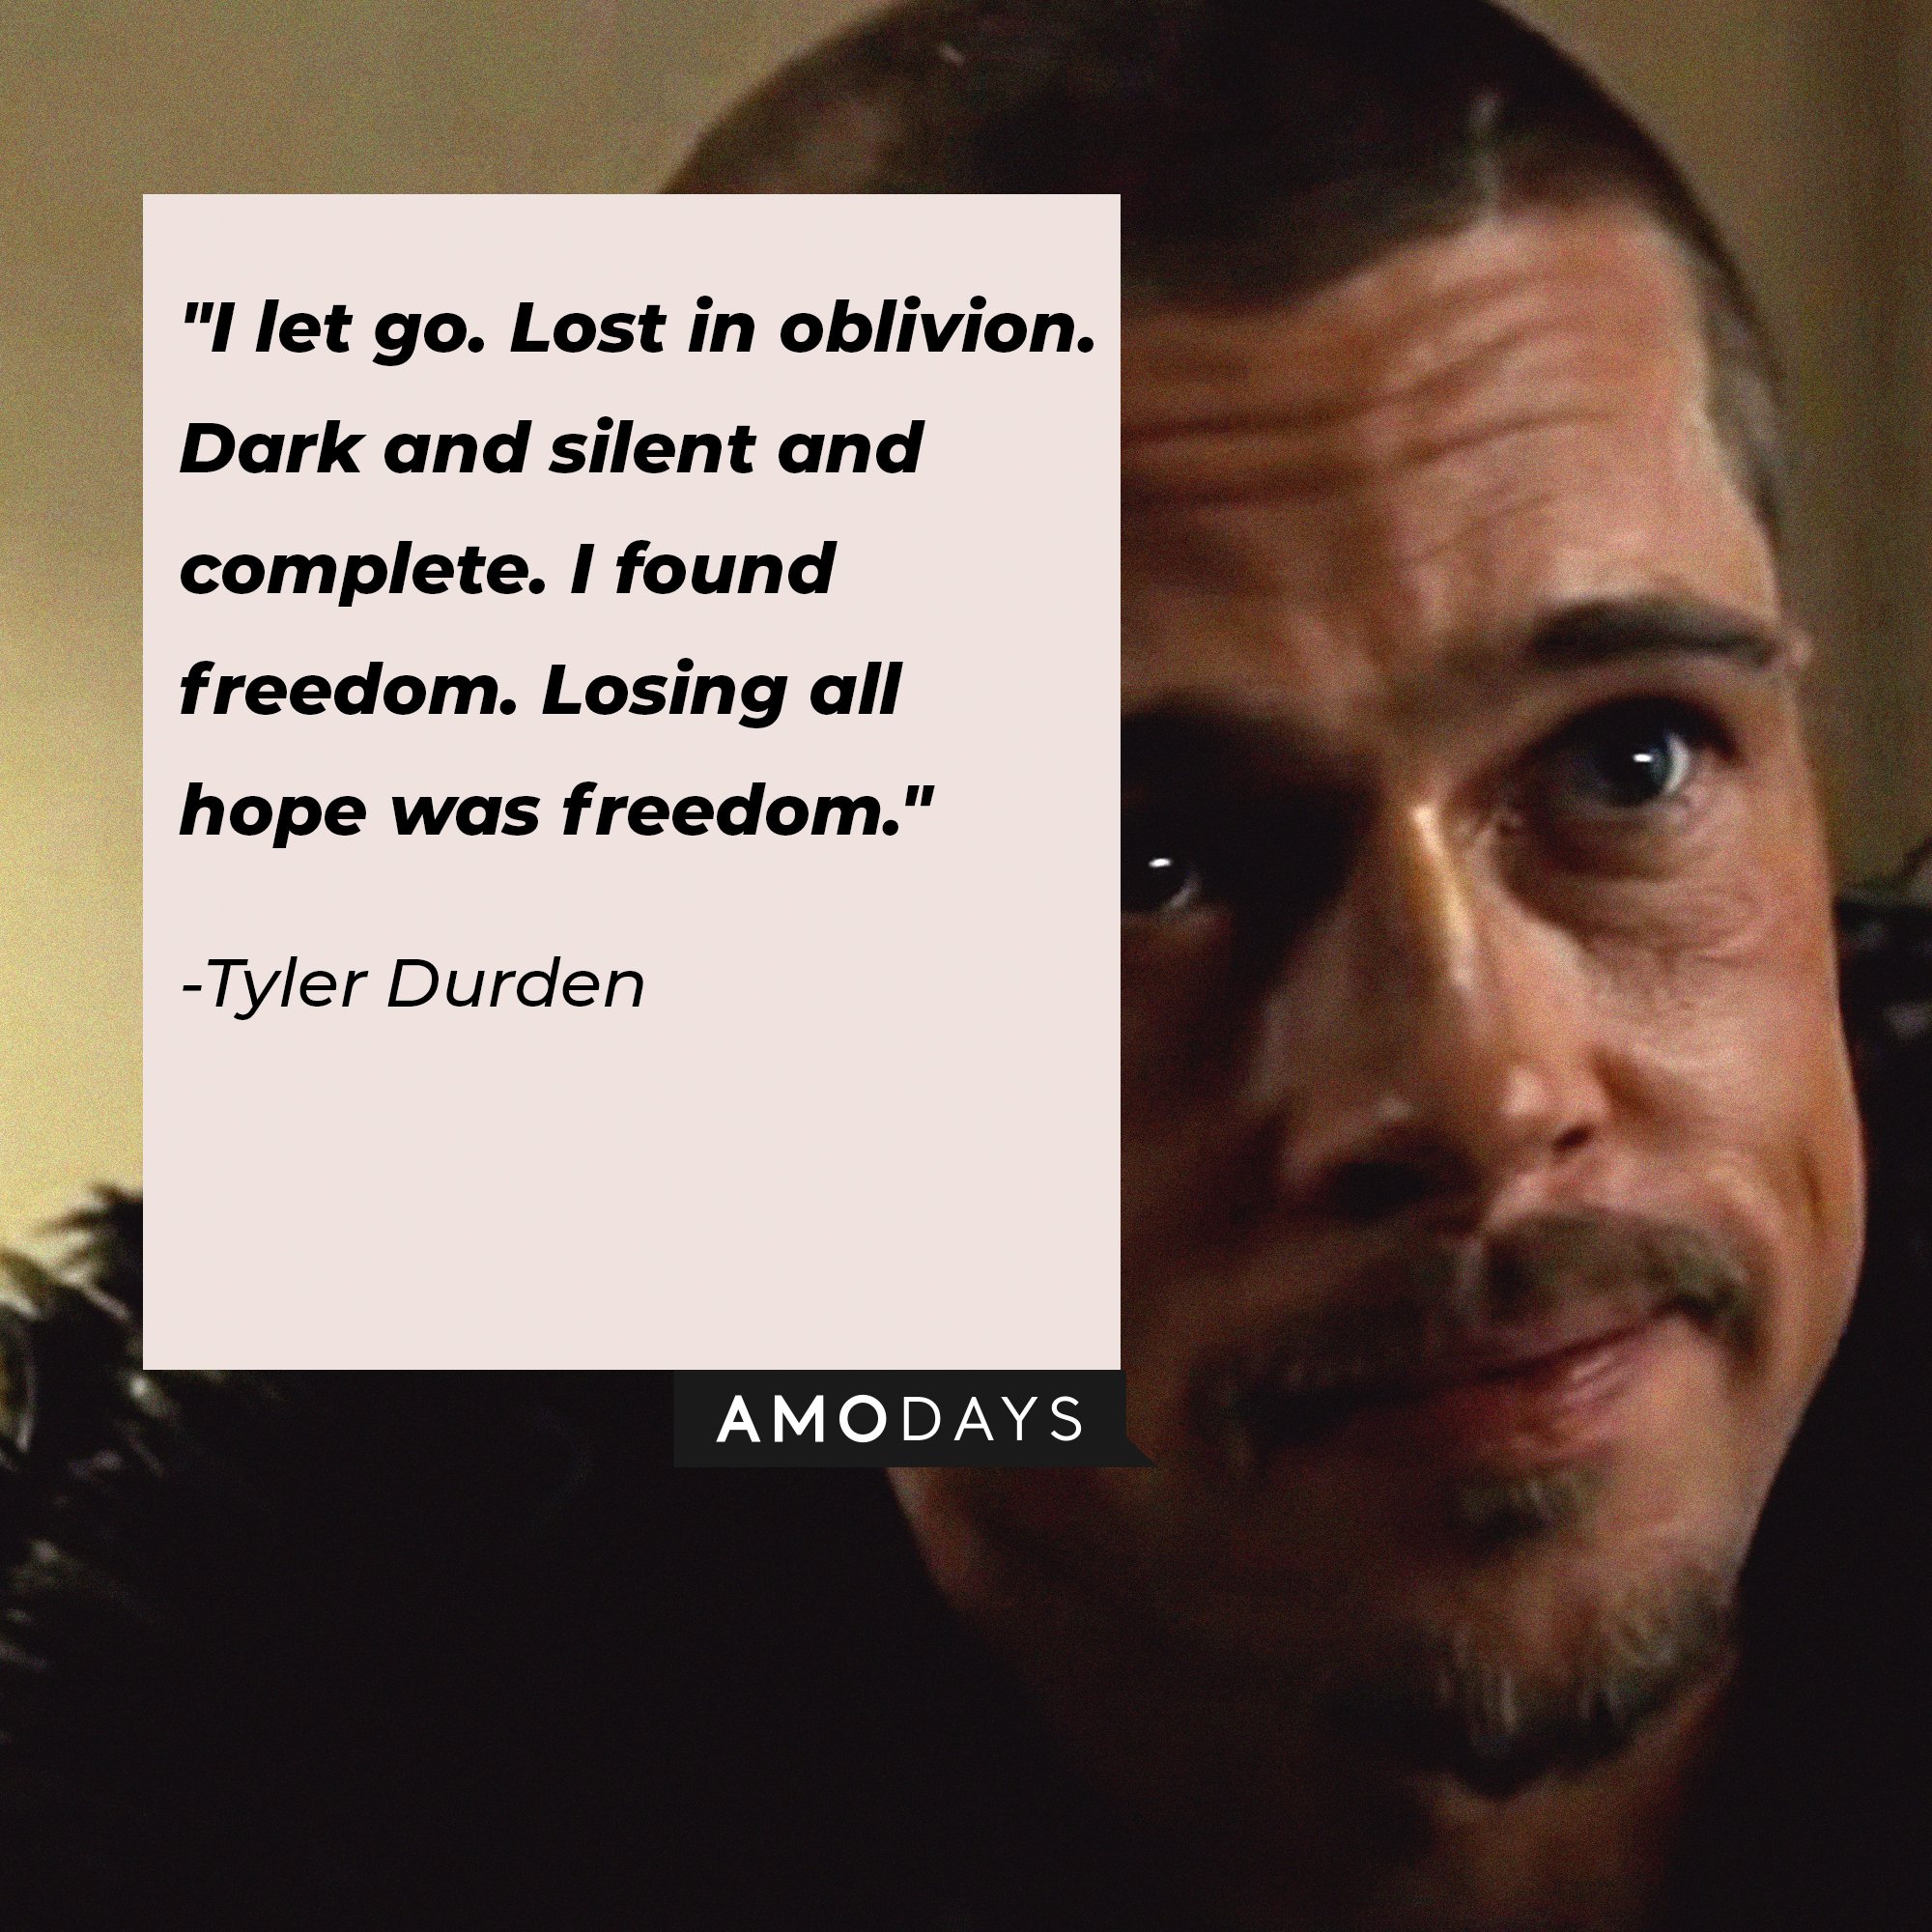 Tyler Durden’s quote: "I let go. Lost in oblivion. Dark and silent and complete. I found freedom. Losing all hope was freedom." | Image: AmoDays